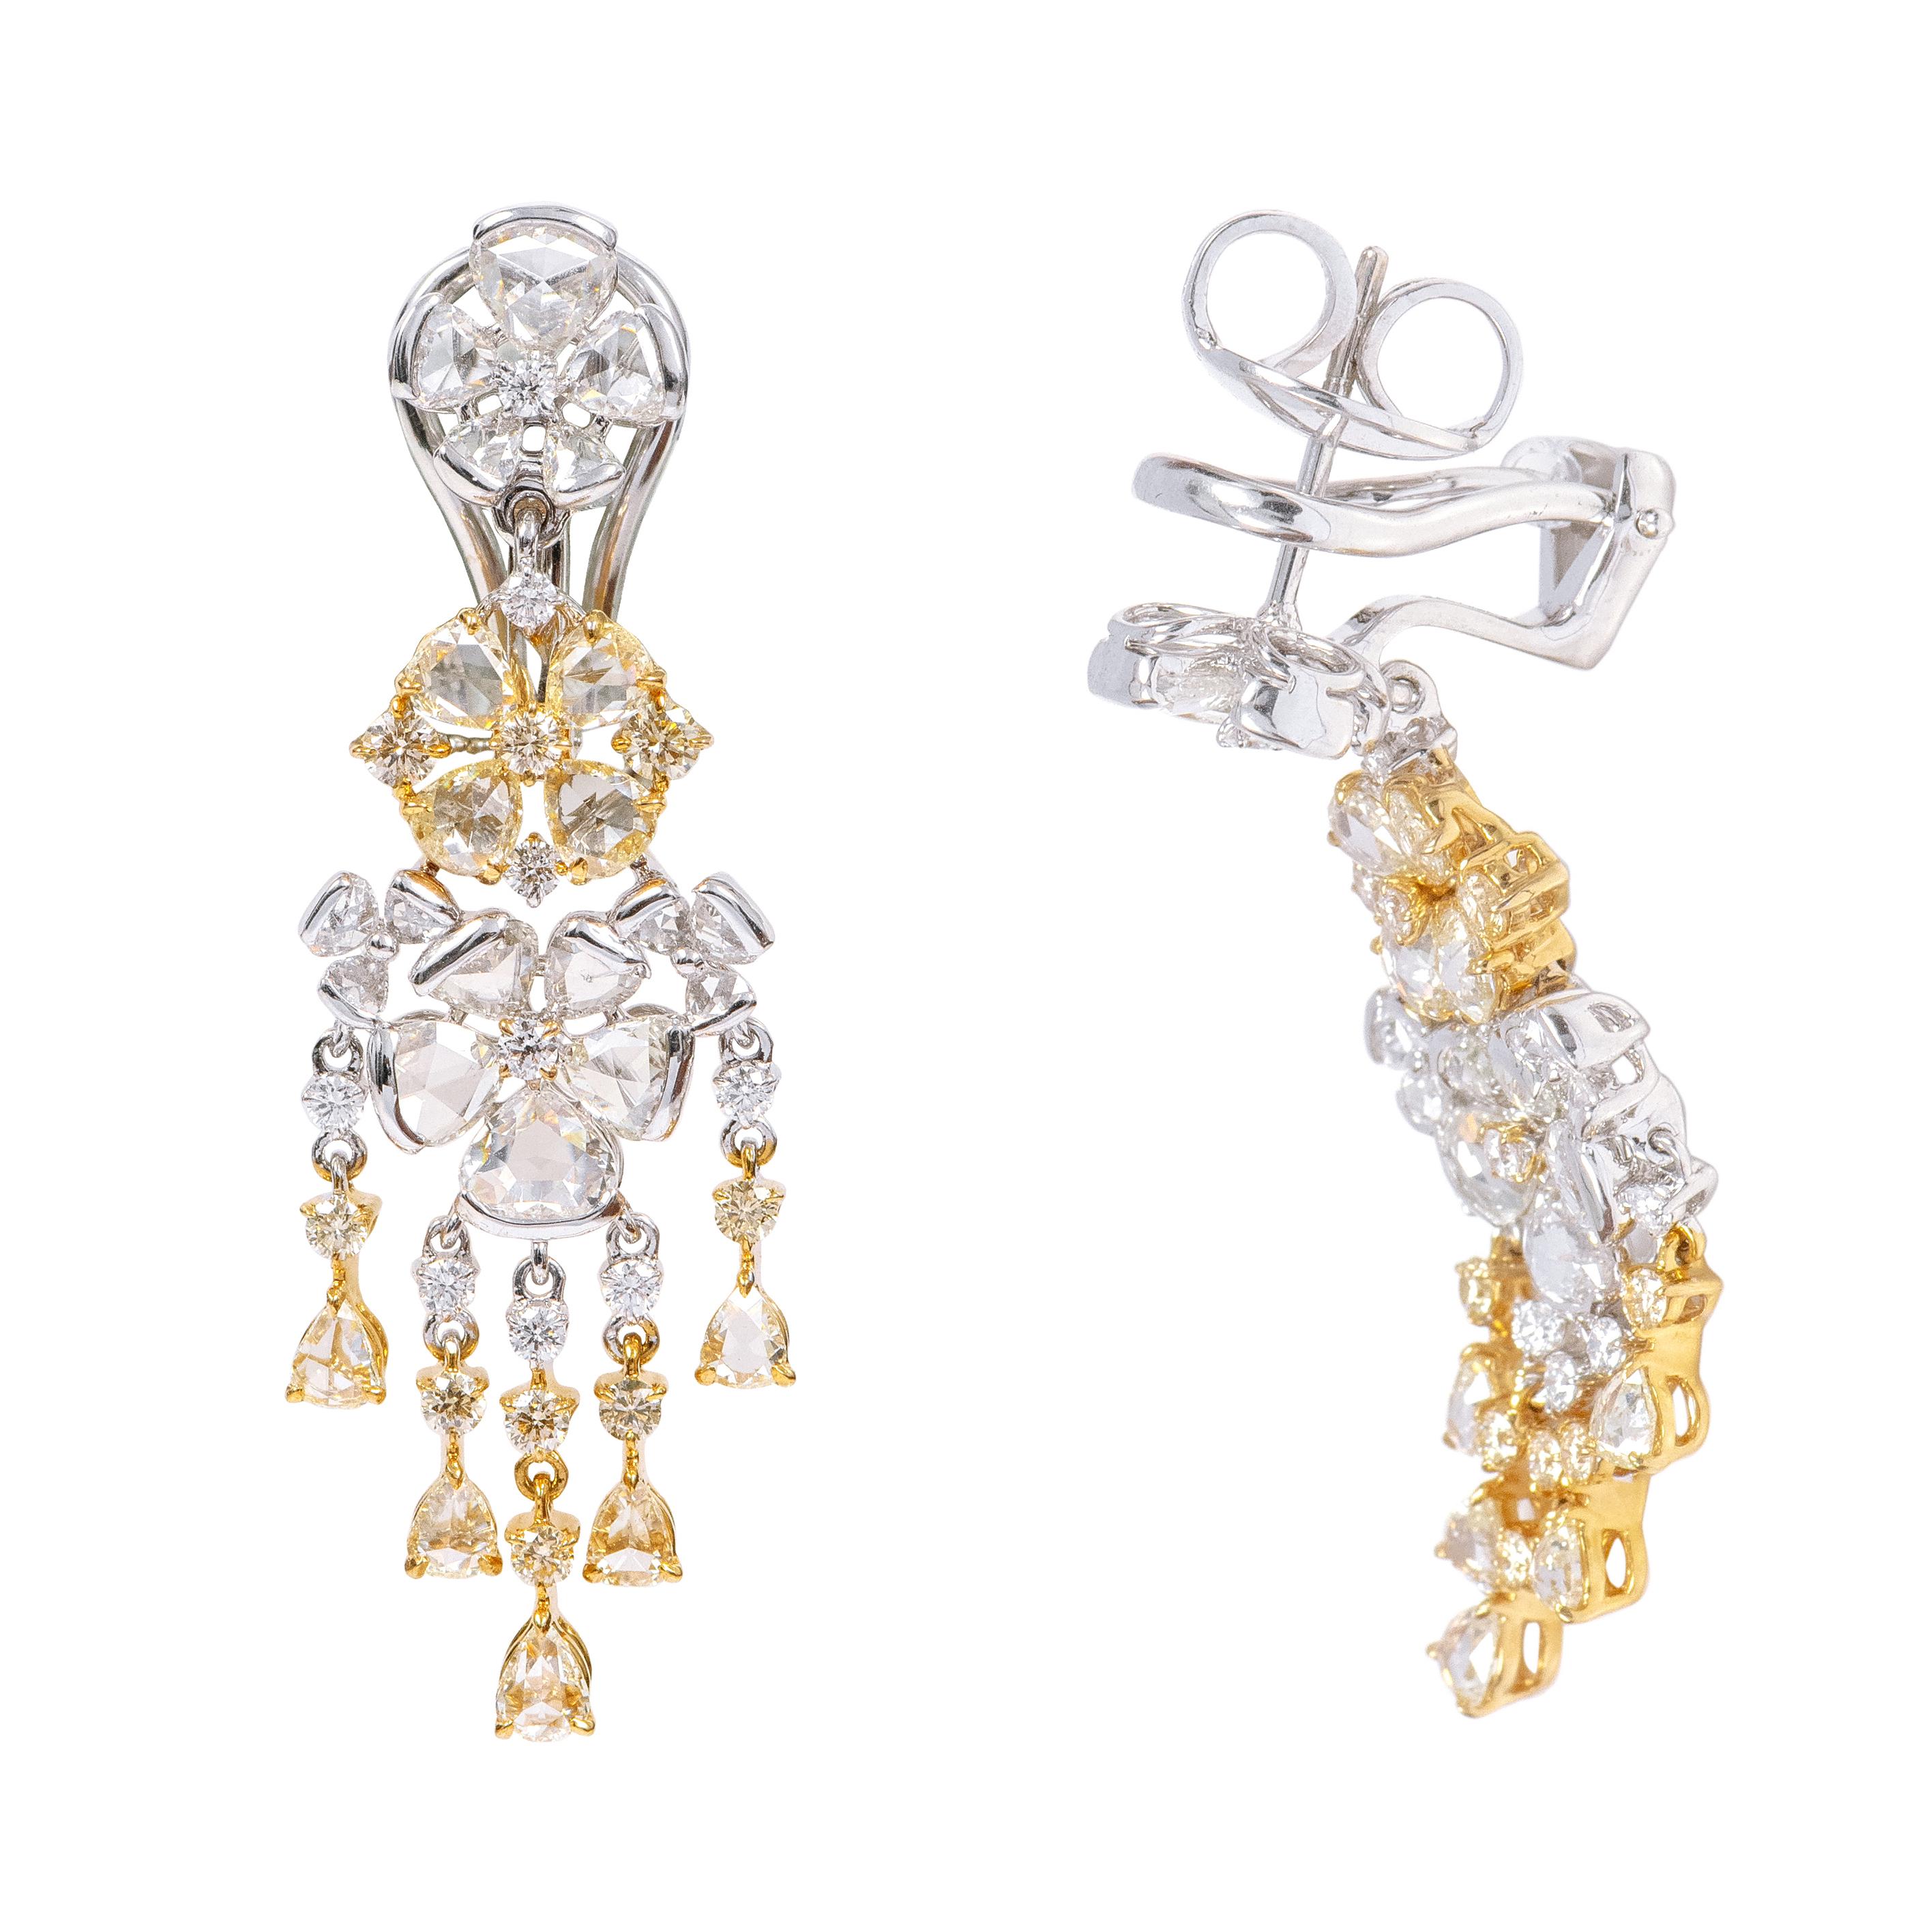 Contemporary 18 Karat Gold 5.23 Carat Fancy Yellow and White Diamond Dangle Earrings For Sale